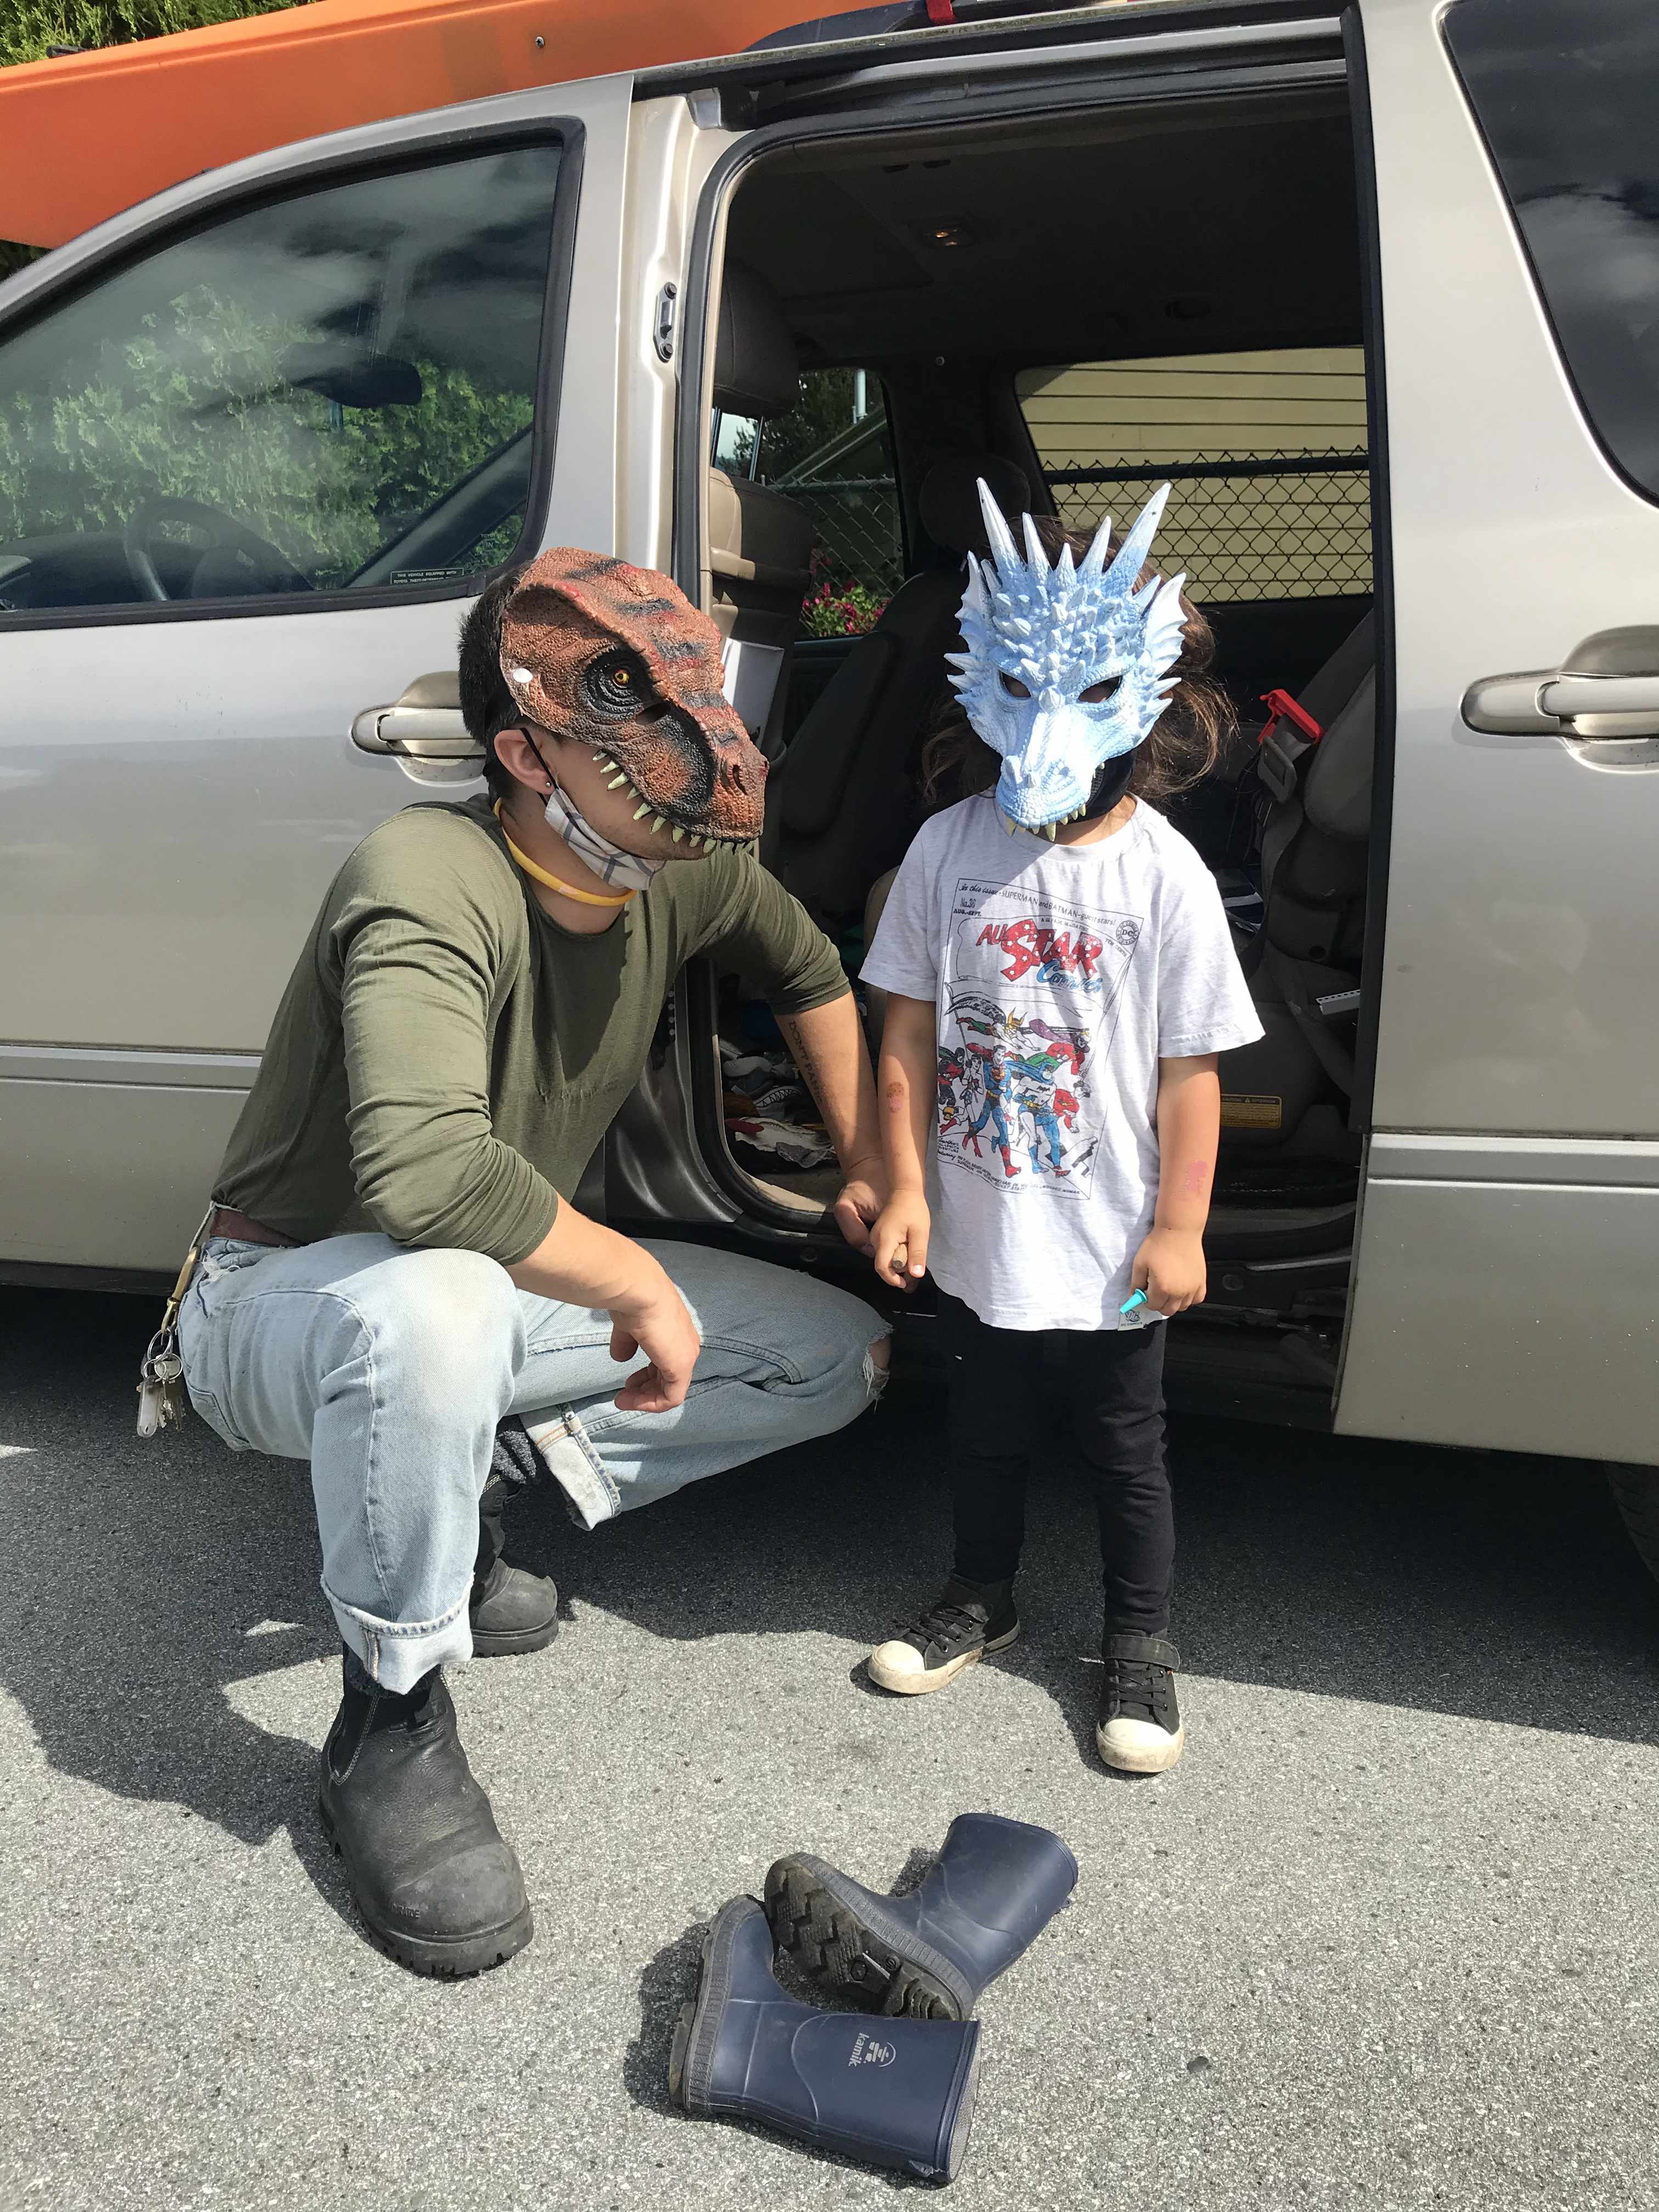 Conor and Rowan posing in front of Conor's van. They are both wearing dinosaur masks